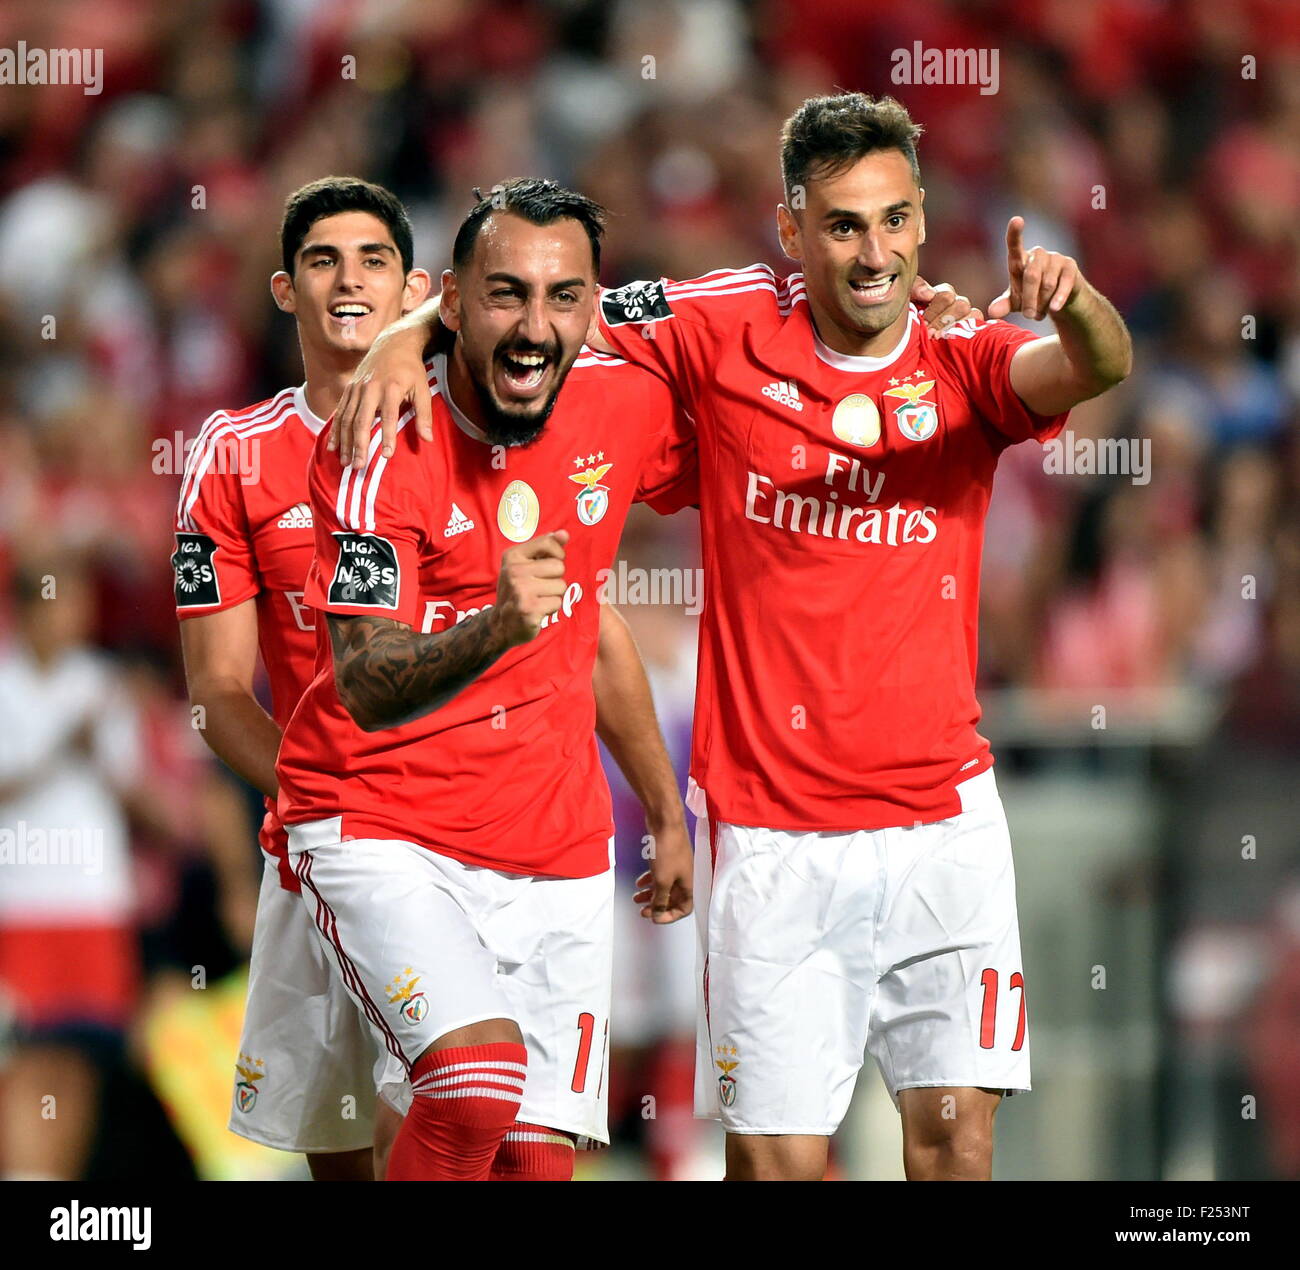 Lisbon, Portugal. 11th Sep, 2015. Kostas Mitroglou (C) of Benfica celebrates with his teammate Jonas Goncalves after scoring during their Portuguese Premier League soccer match against Belenenses in Lisbon, Portugal, Sept. 11, 2015. Benfica won 6-0. Credit:  Zhang Liyun/Xinhua/Alamy Live News Stock Photo